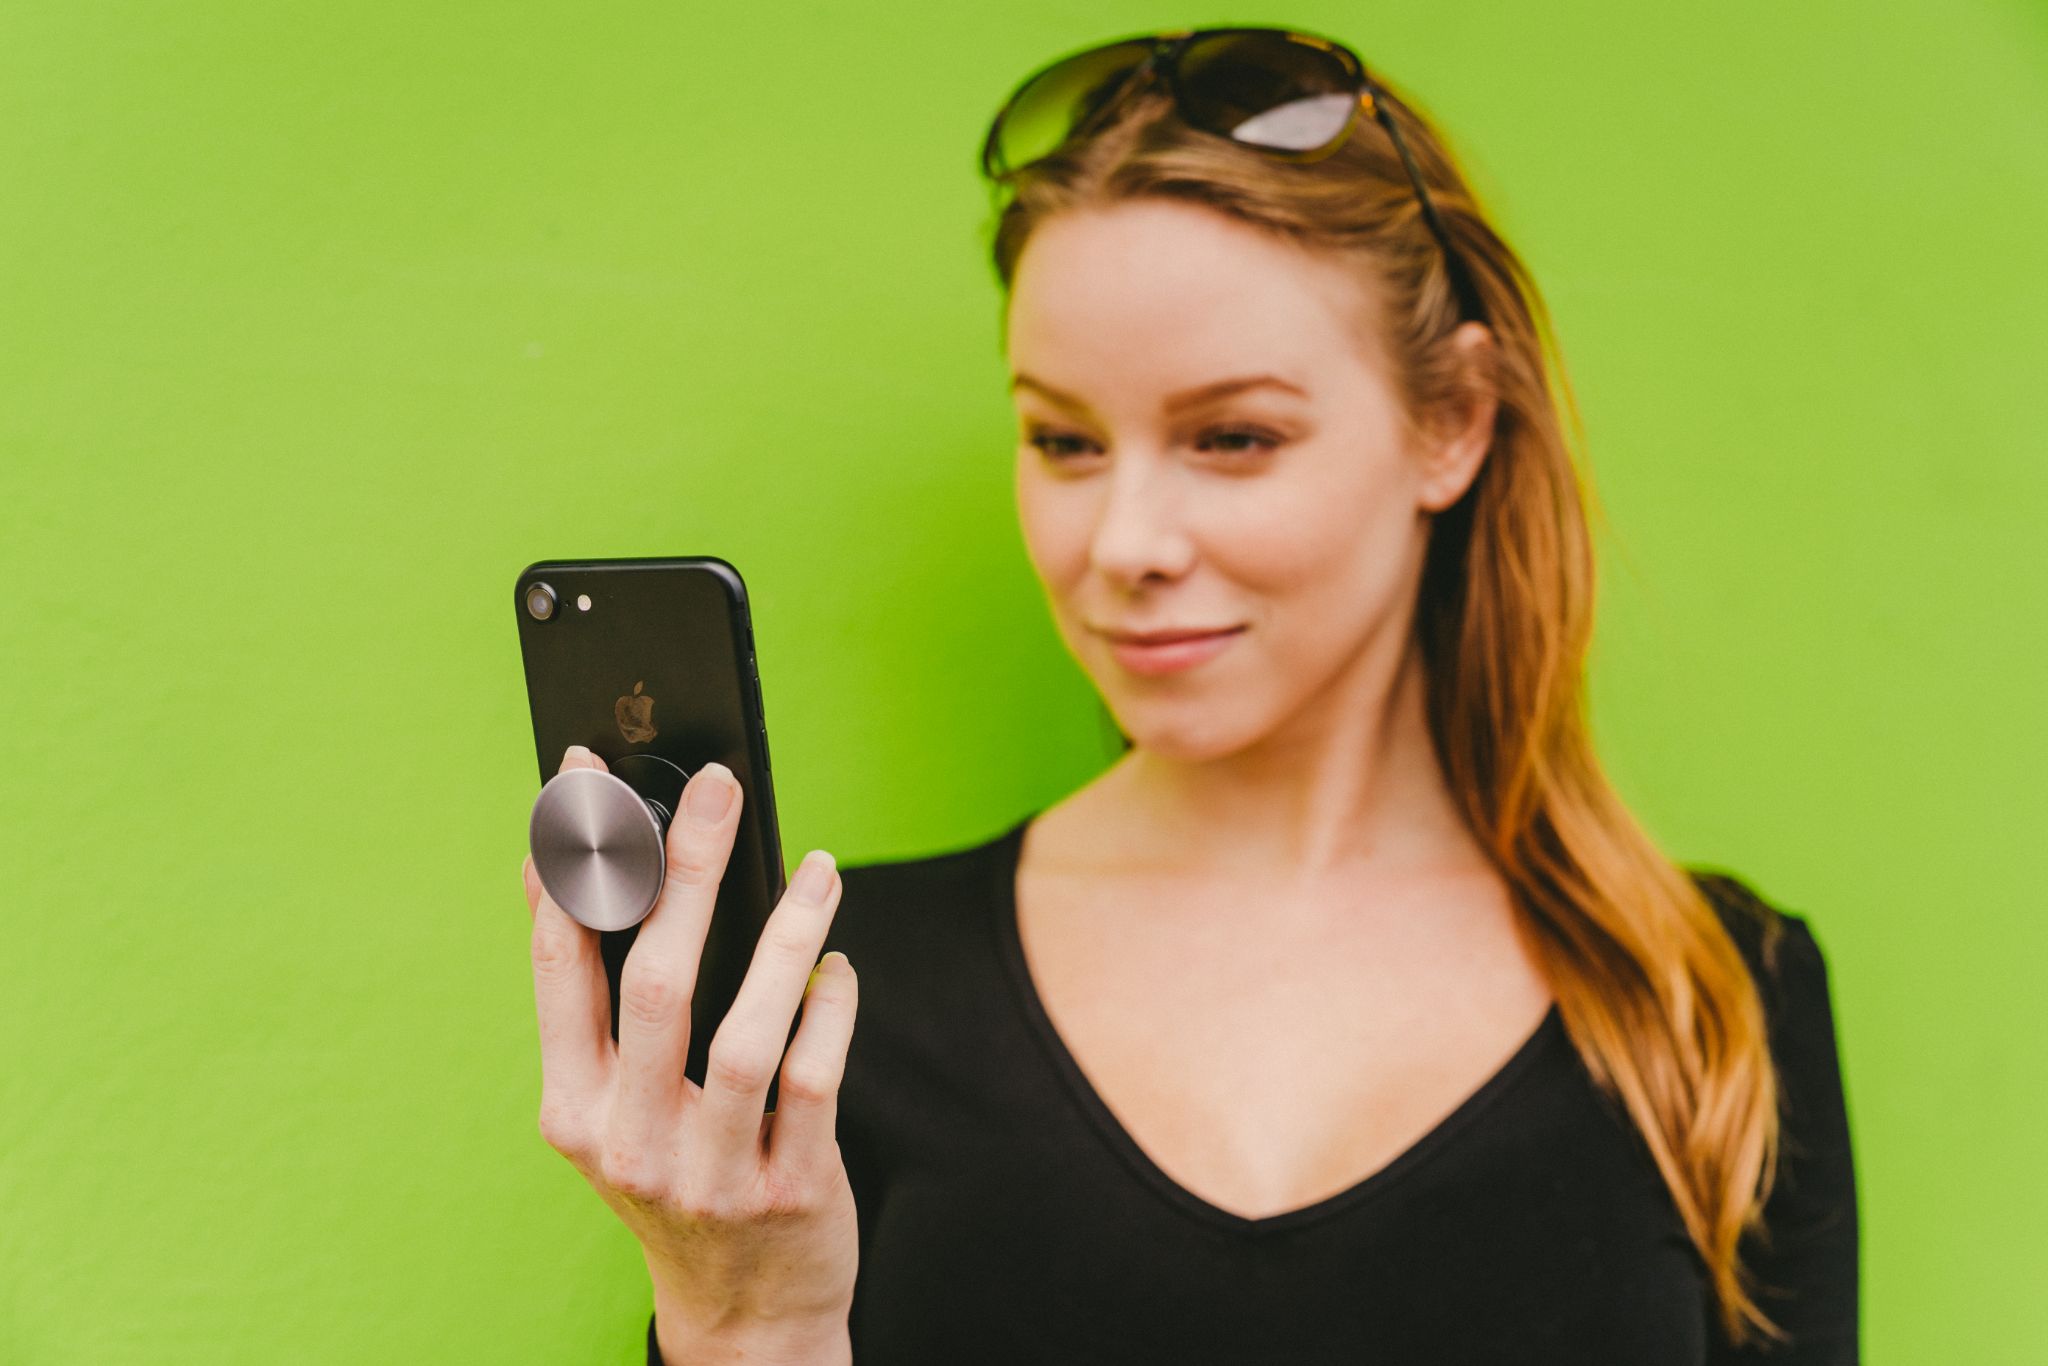 Closeup of person with long red hair wearing a black top using a cell phone leaning on a lime green colored wall